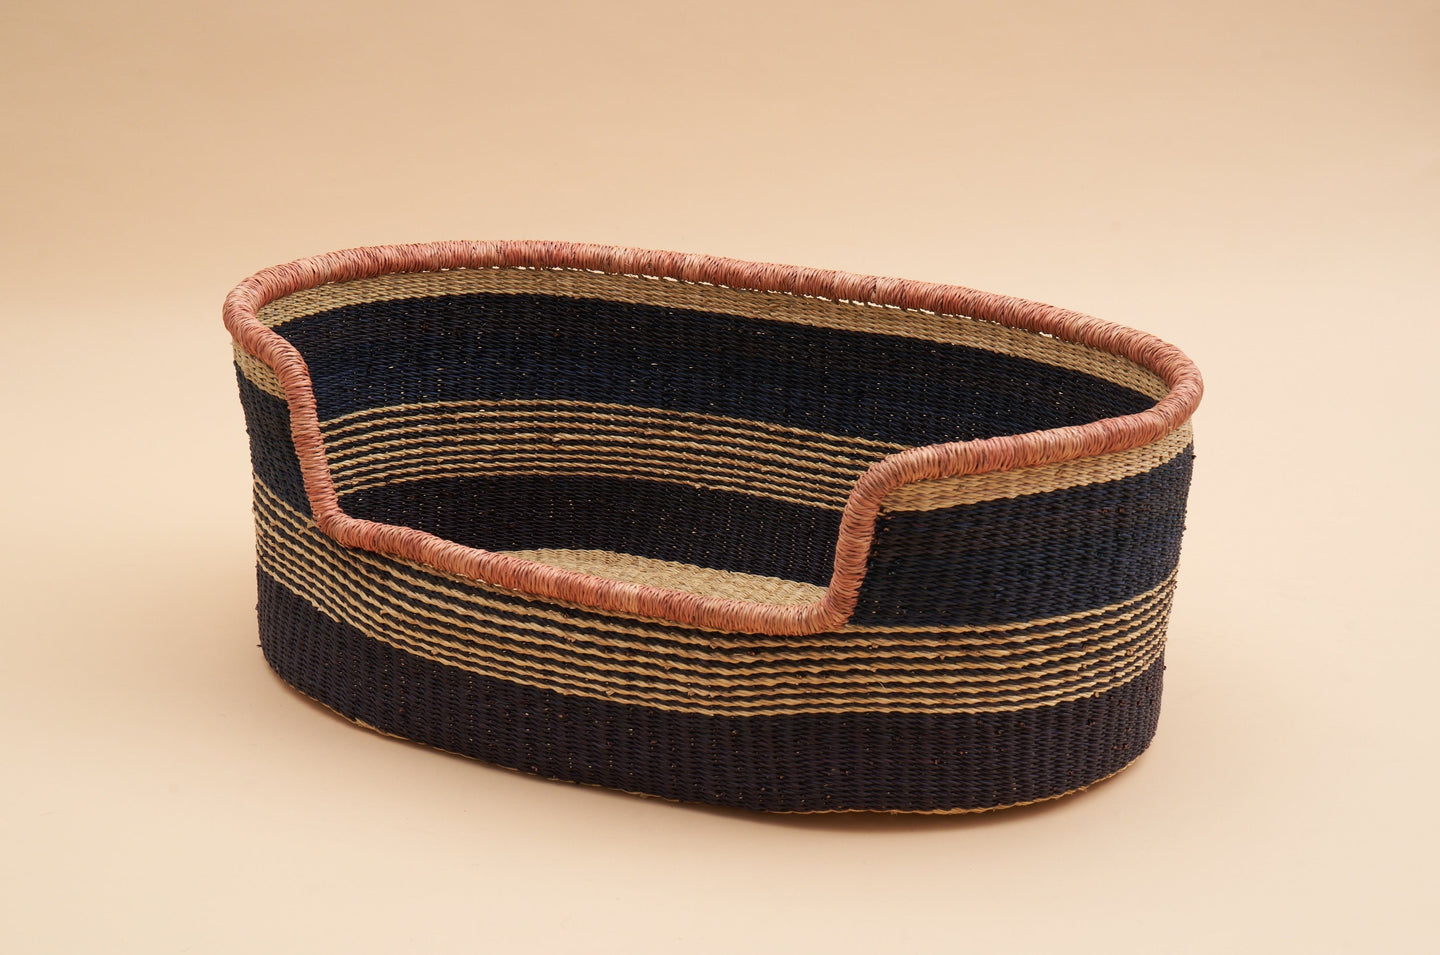 Sprawler Handwoven Dog Bed Basket - Peach Top (Store pick up only)